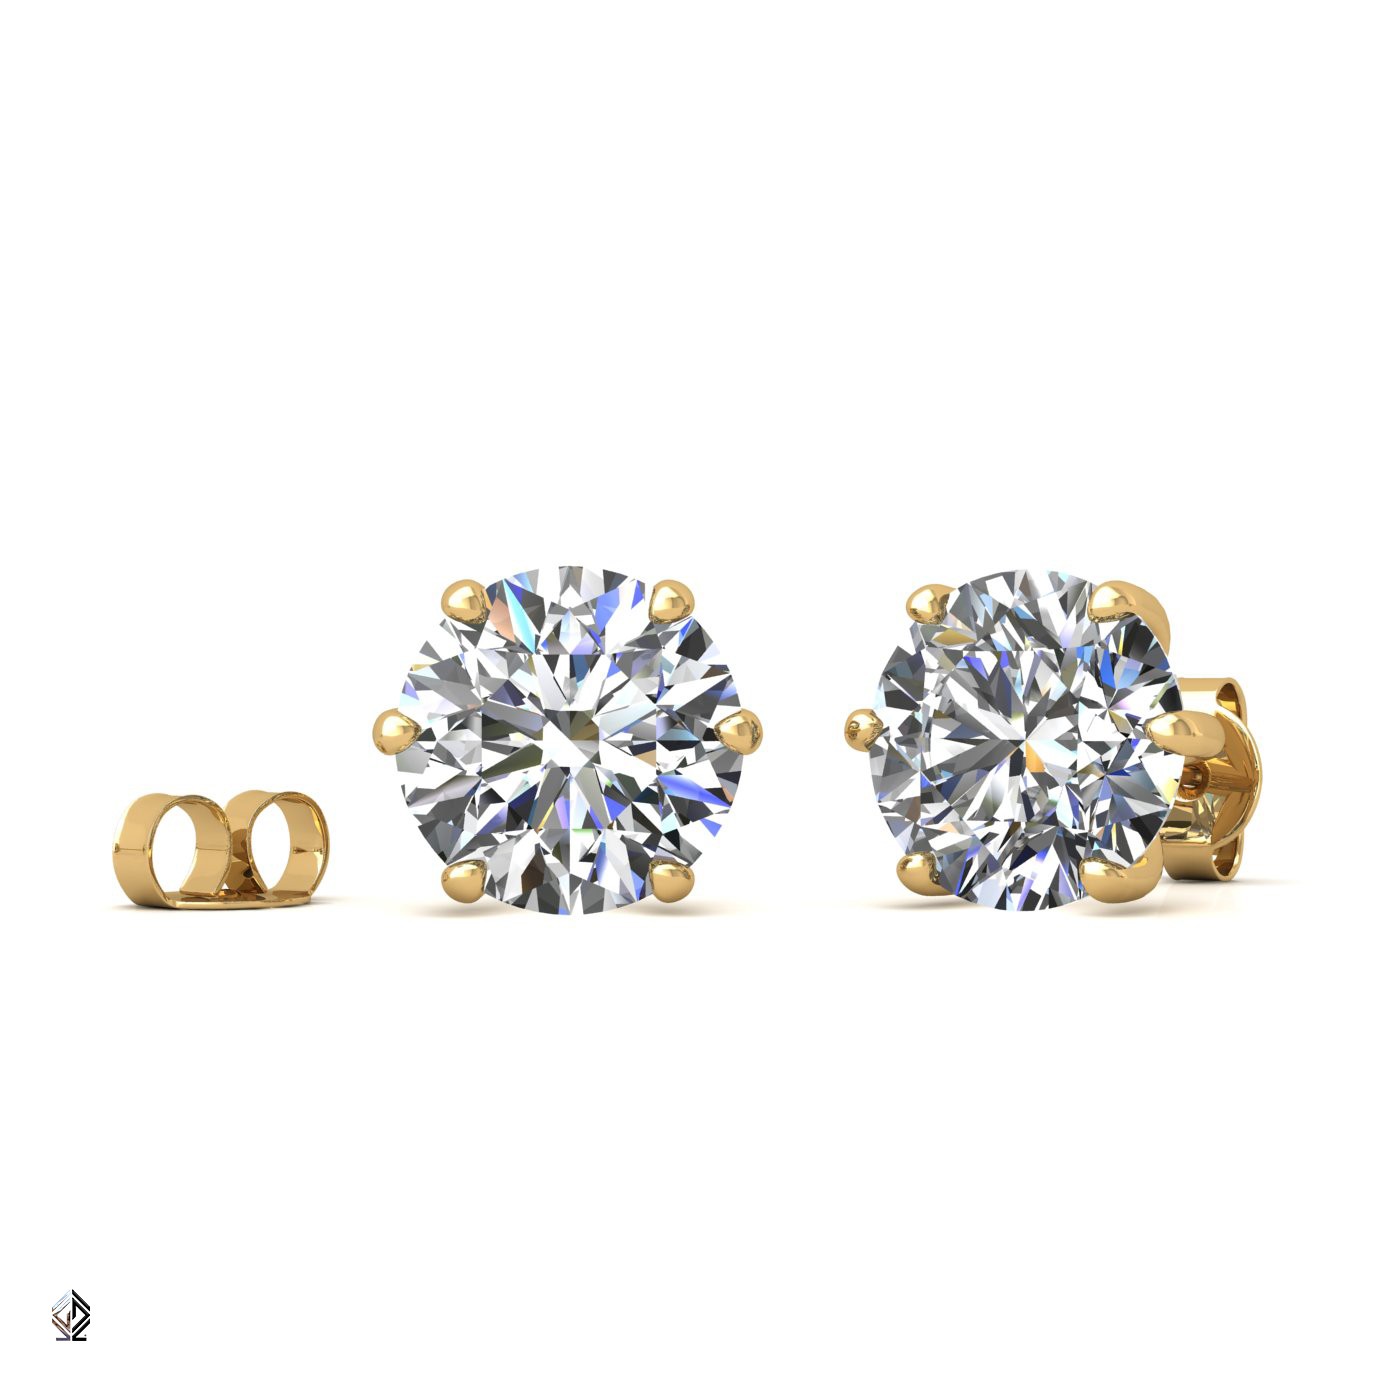 18k yellow gold 2.5 ct each (5,0 tcw) 6 prongs round shape diamond earrings Photos & images